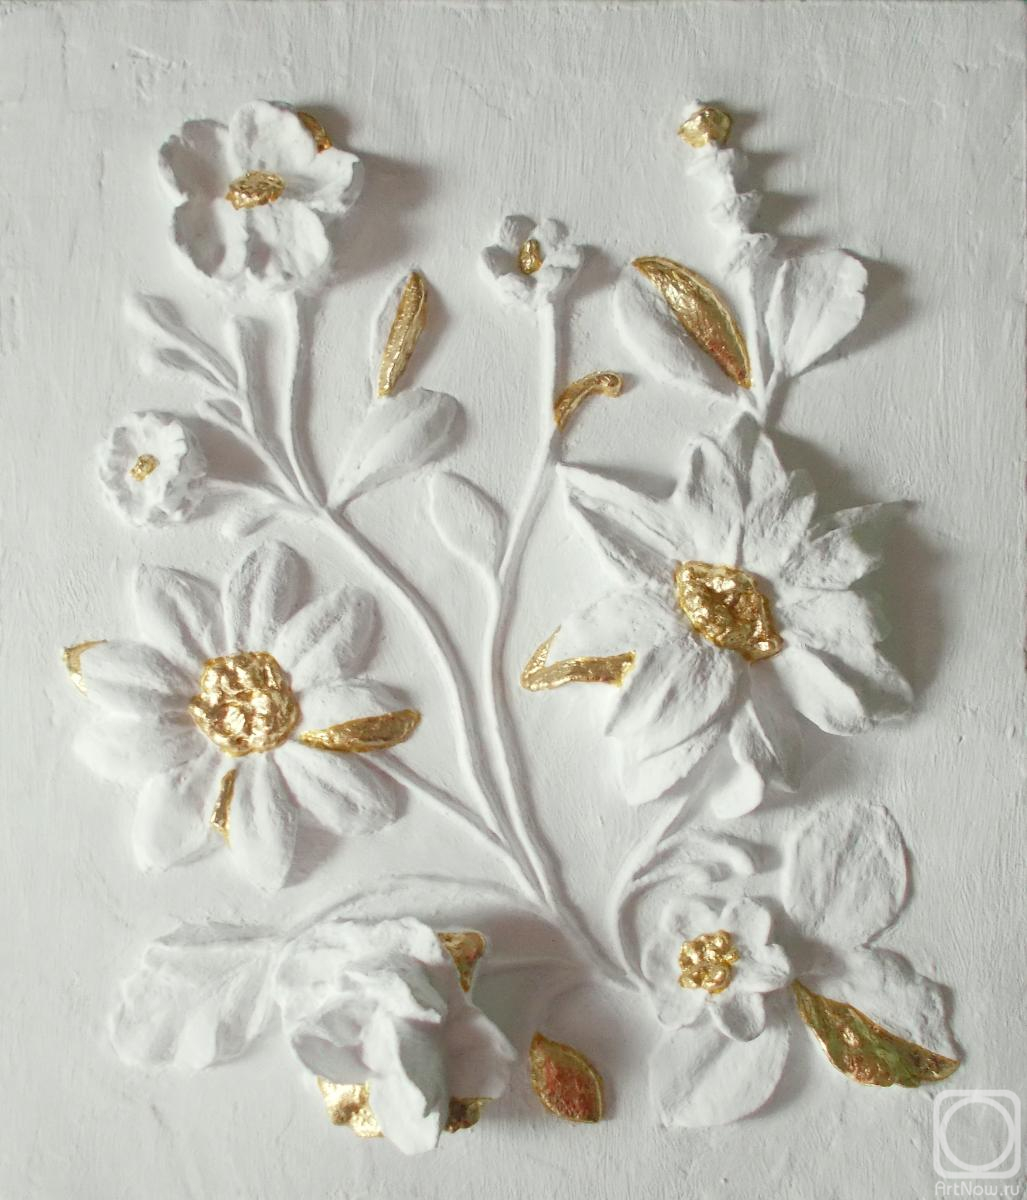 Mironova Tatiana. Flowers with gold decor" (from the series "White and gold")